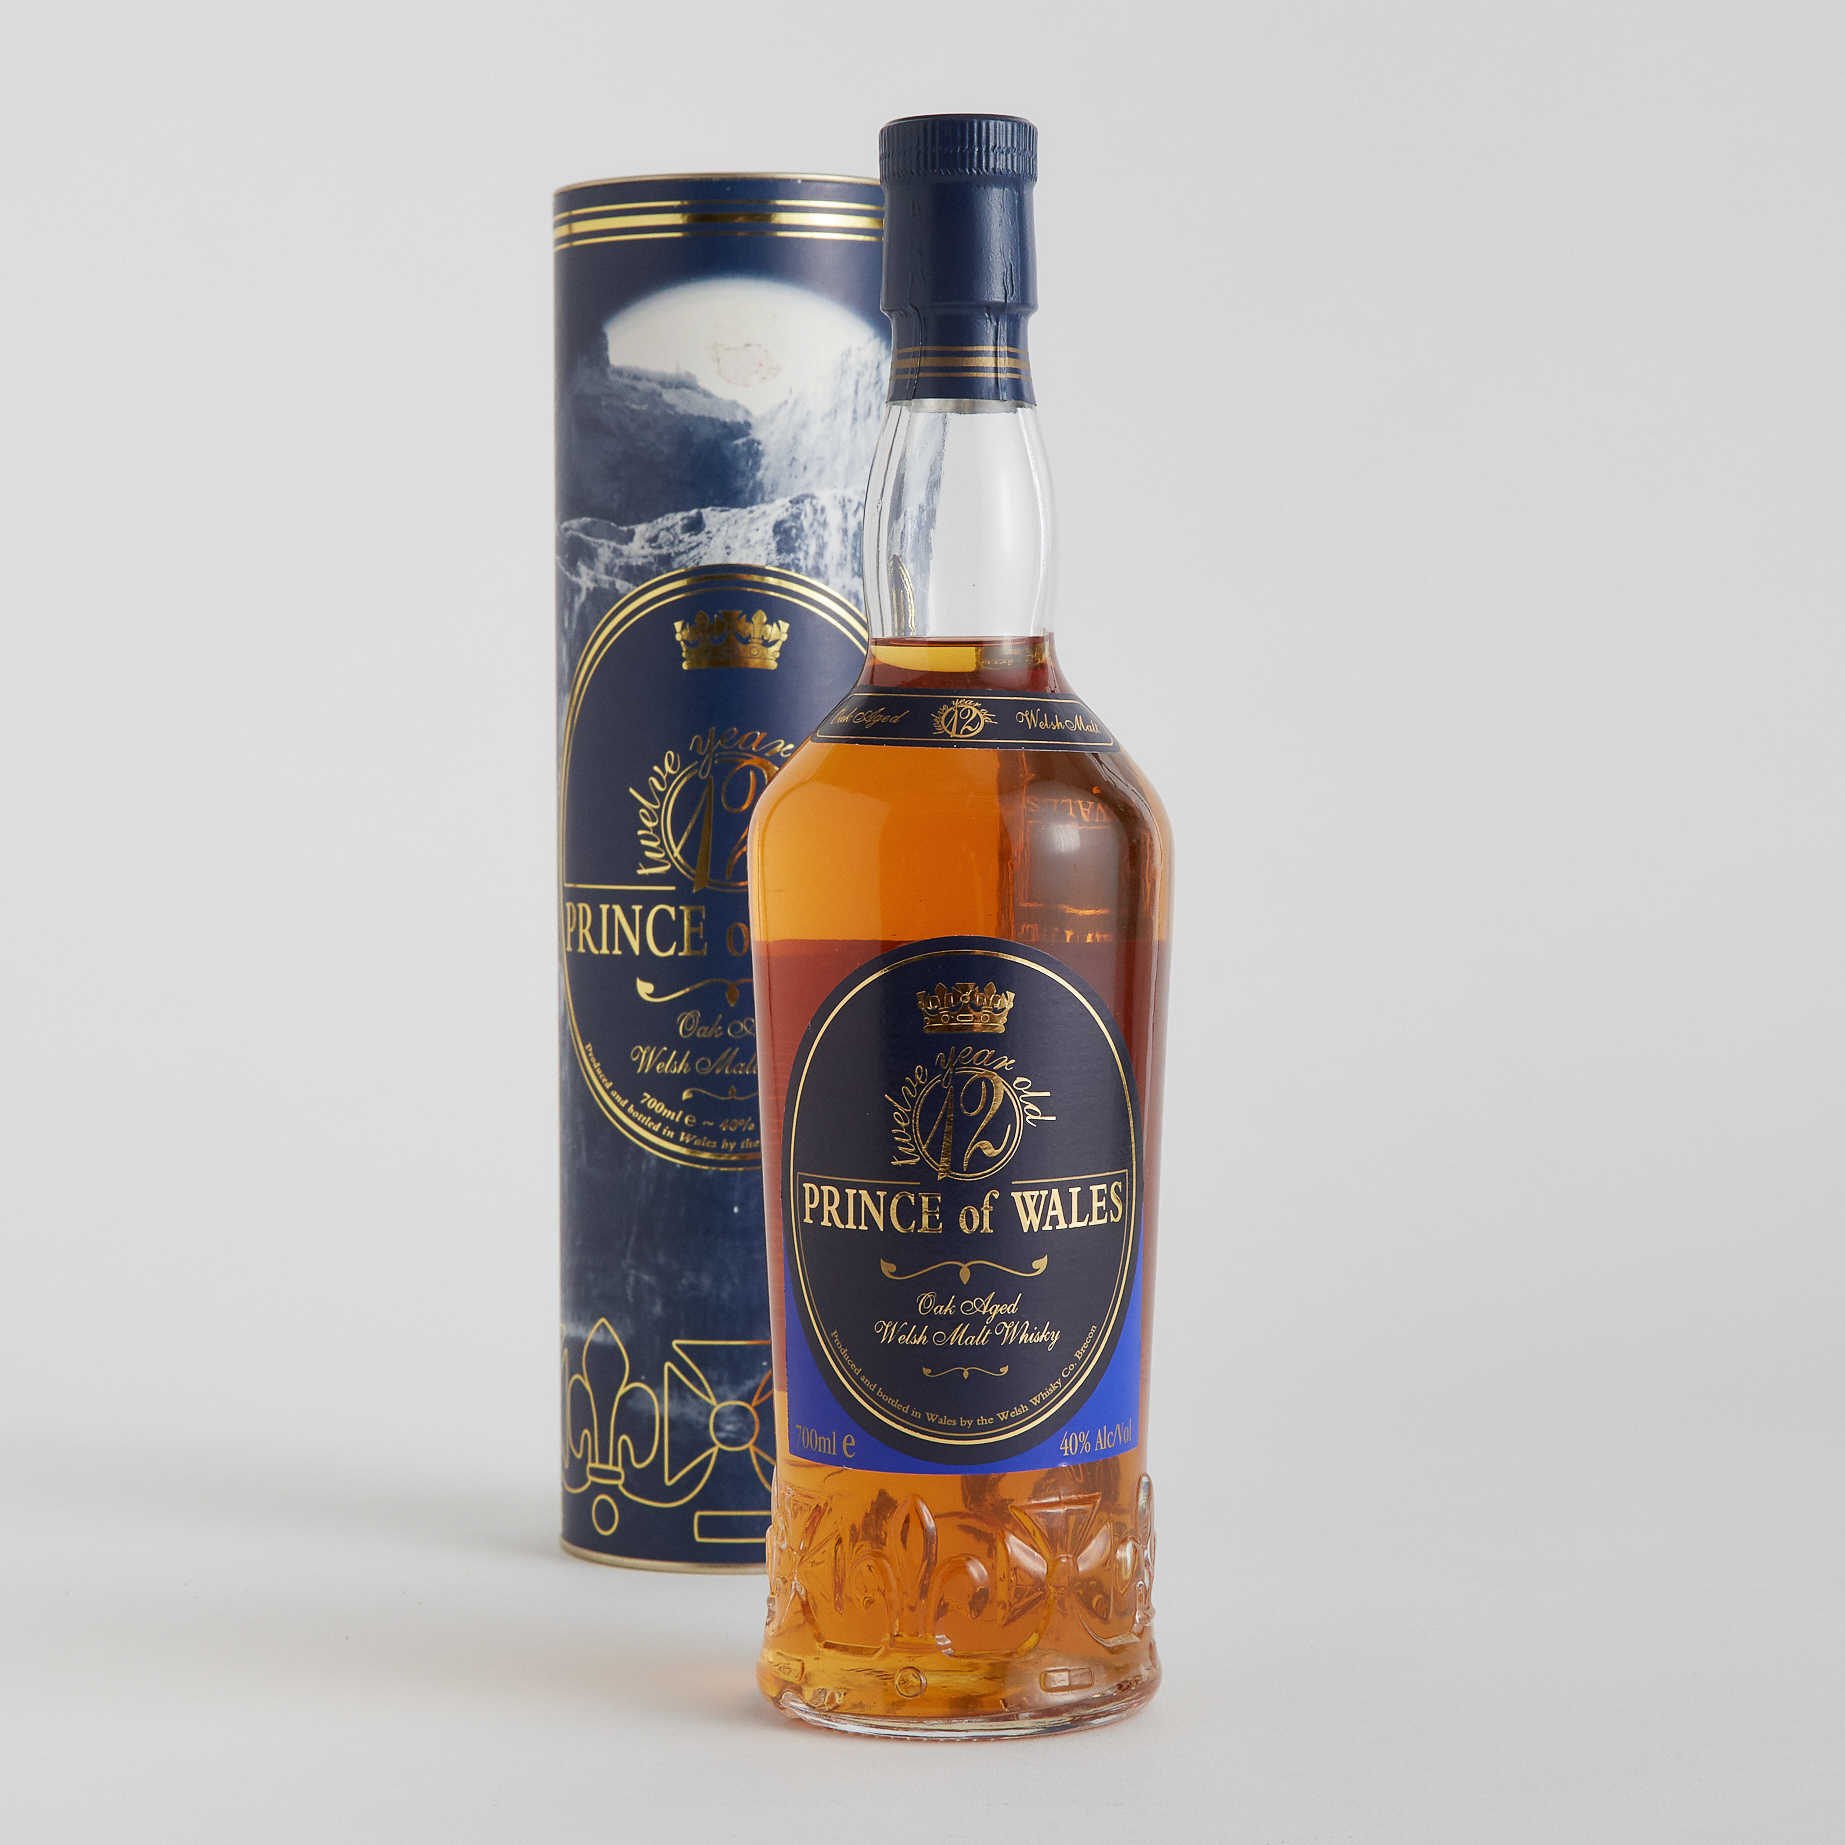 PRINCE OF WALES WELCH BLENDED MALT WHISKY 12 YEARS (ONE 700 ML)